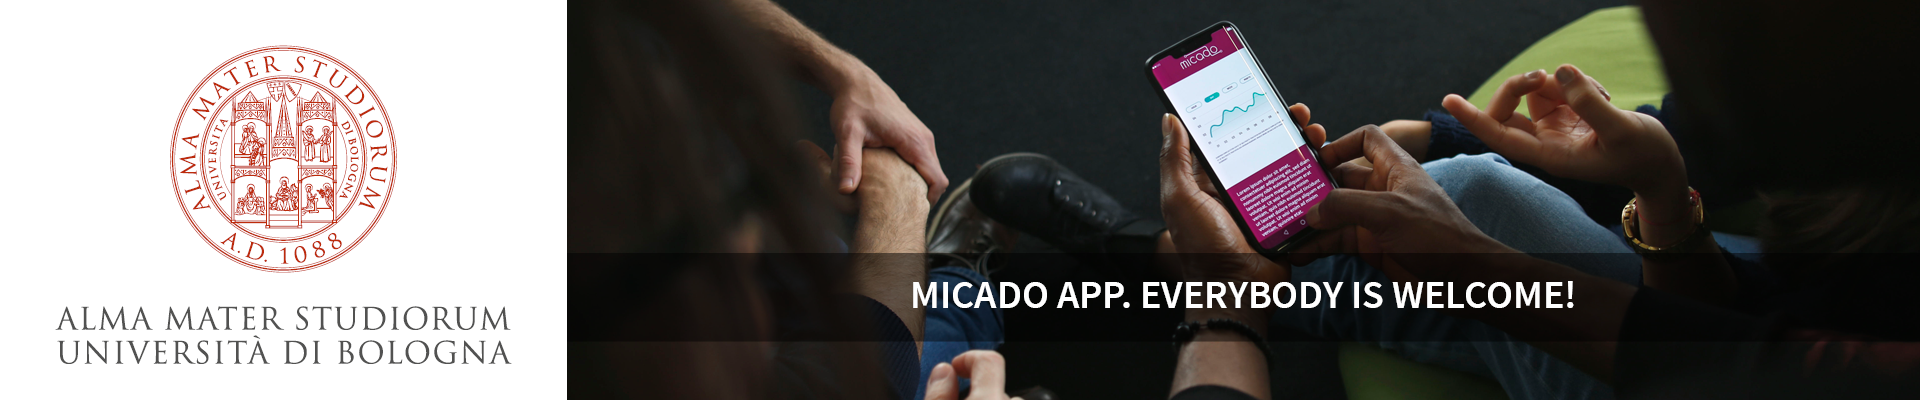 MICADO app. Everybody is welcome! - 